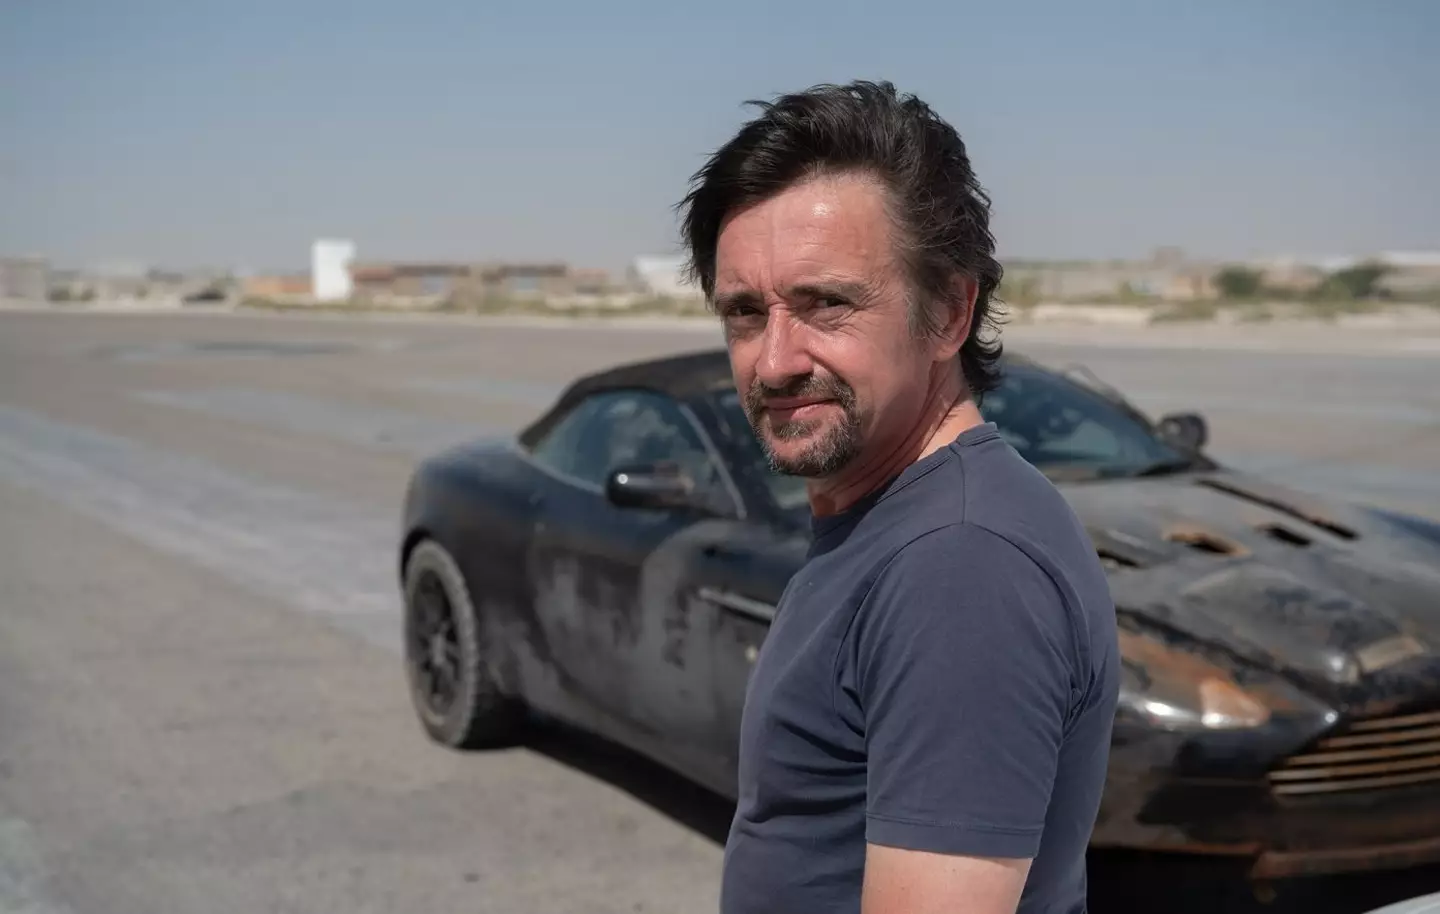 Richard Hammond was left in a two week coma following his 2006 crash.